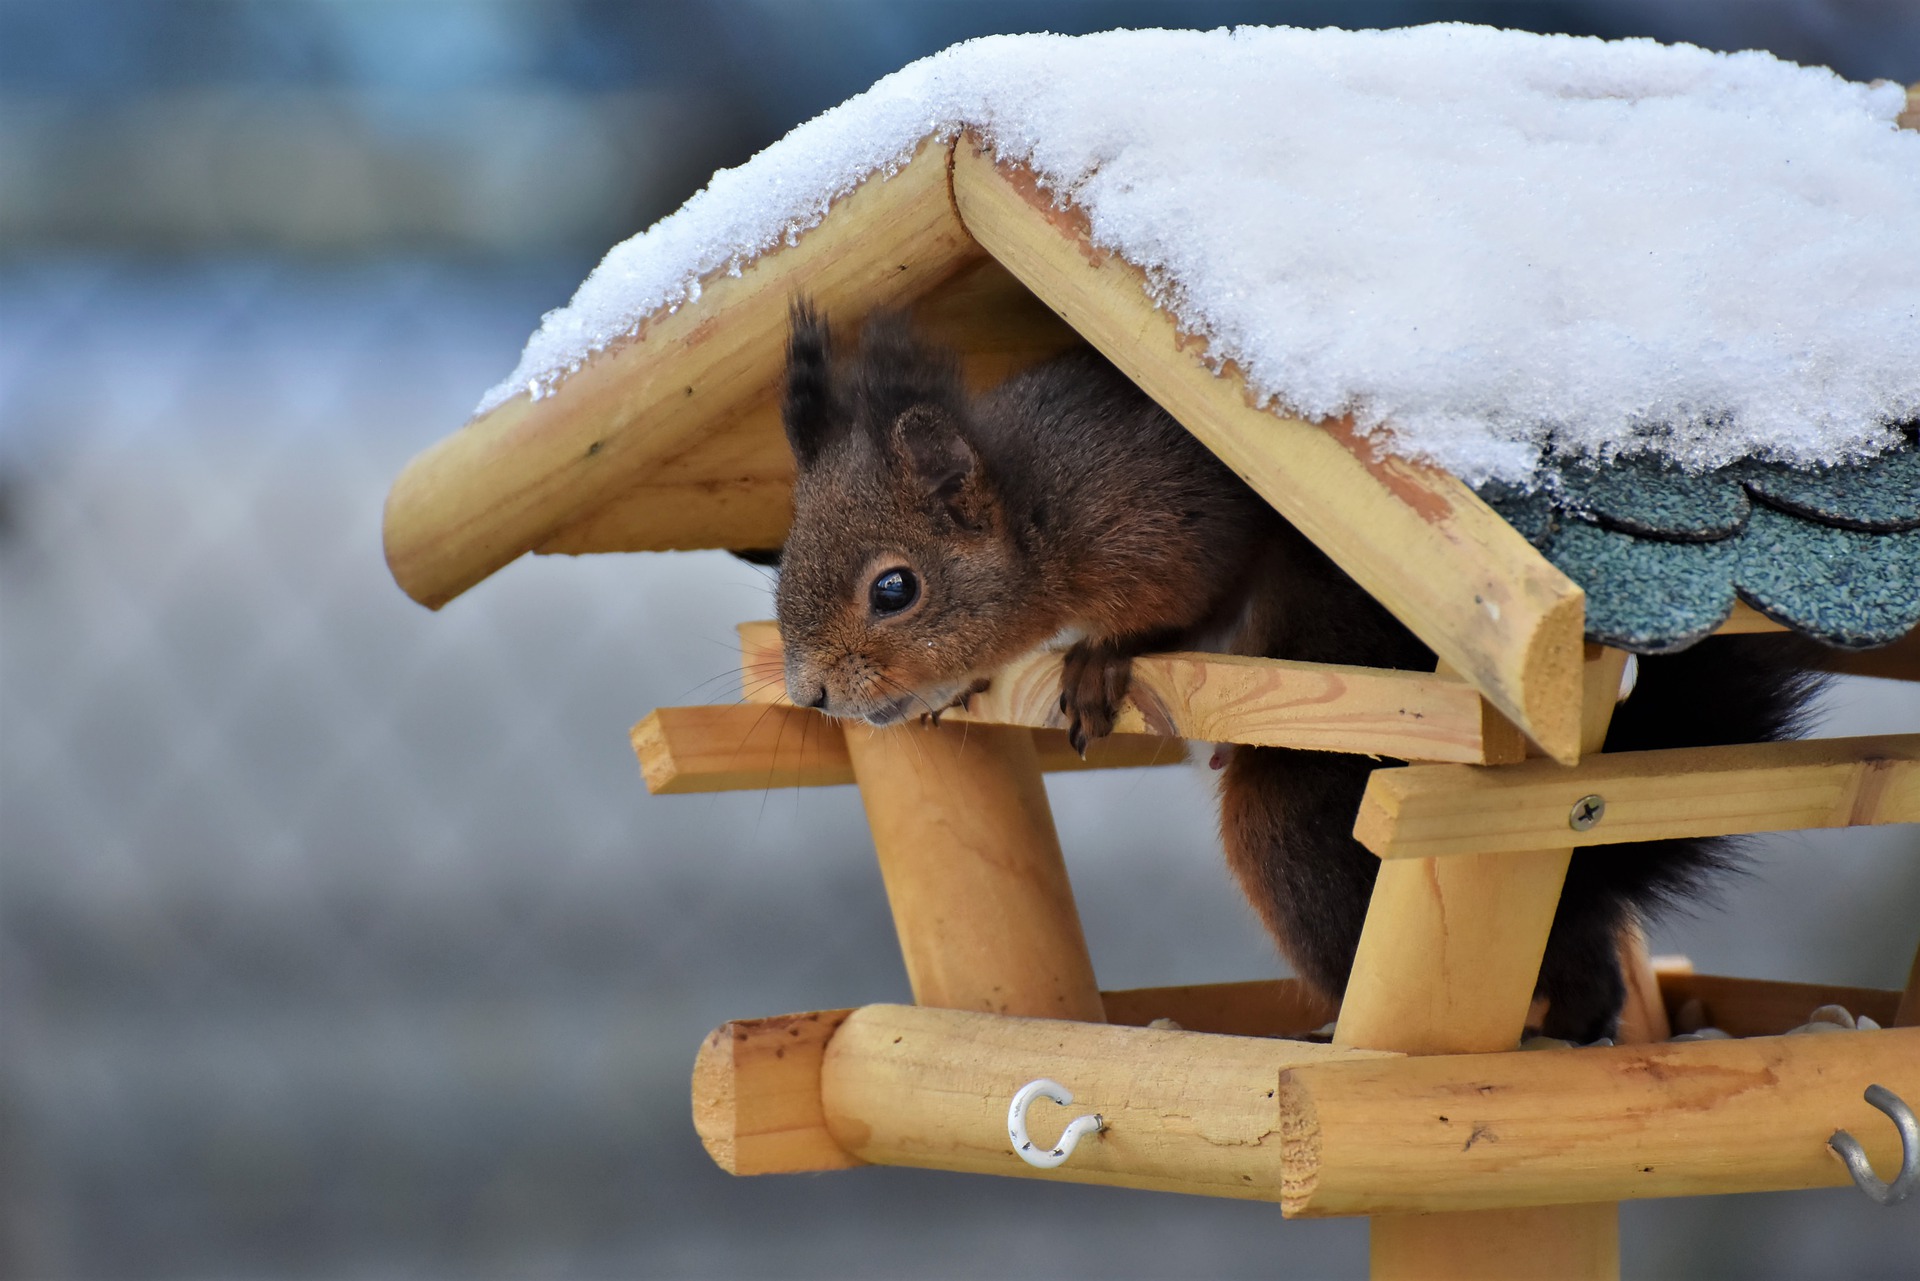 A squirrel peaks out of a little house covered in snow